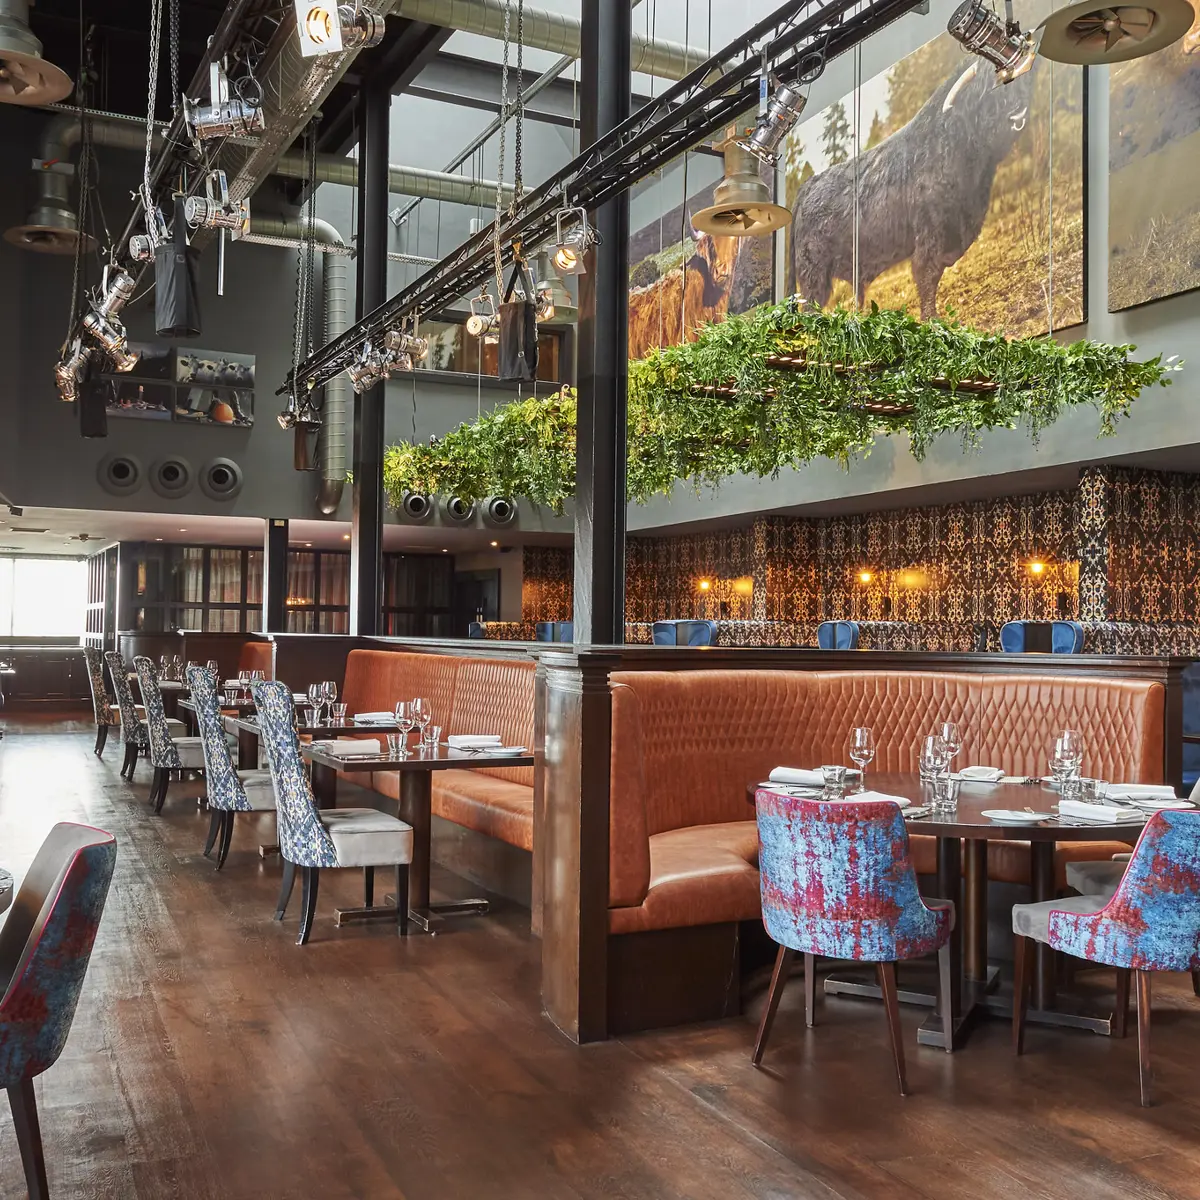 Malmaison Aberdeen Grill restaurant featuring booth seating, feature art on the walls, and overhead lighting rigs.